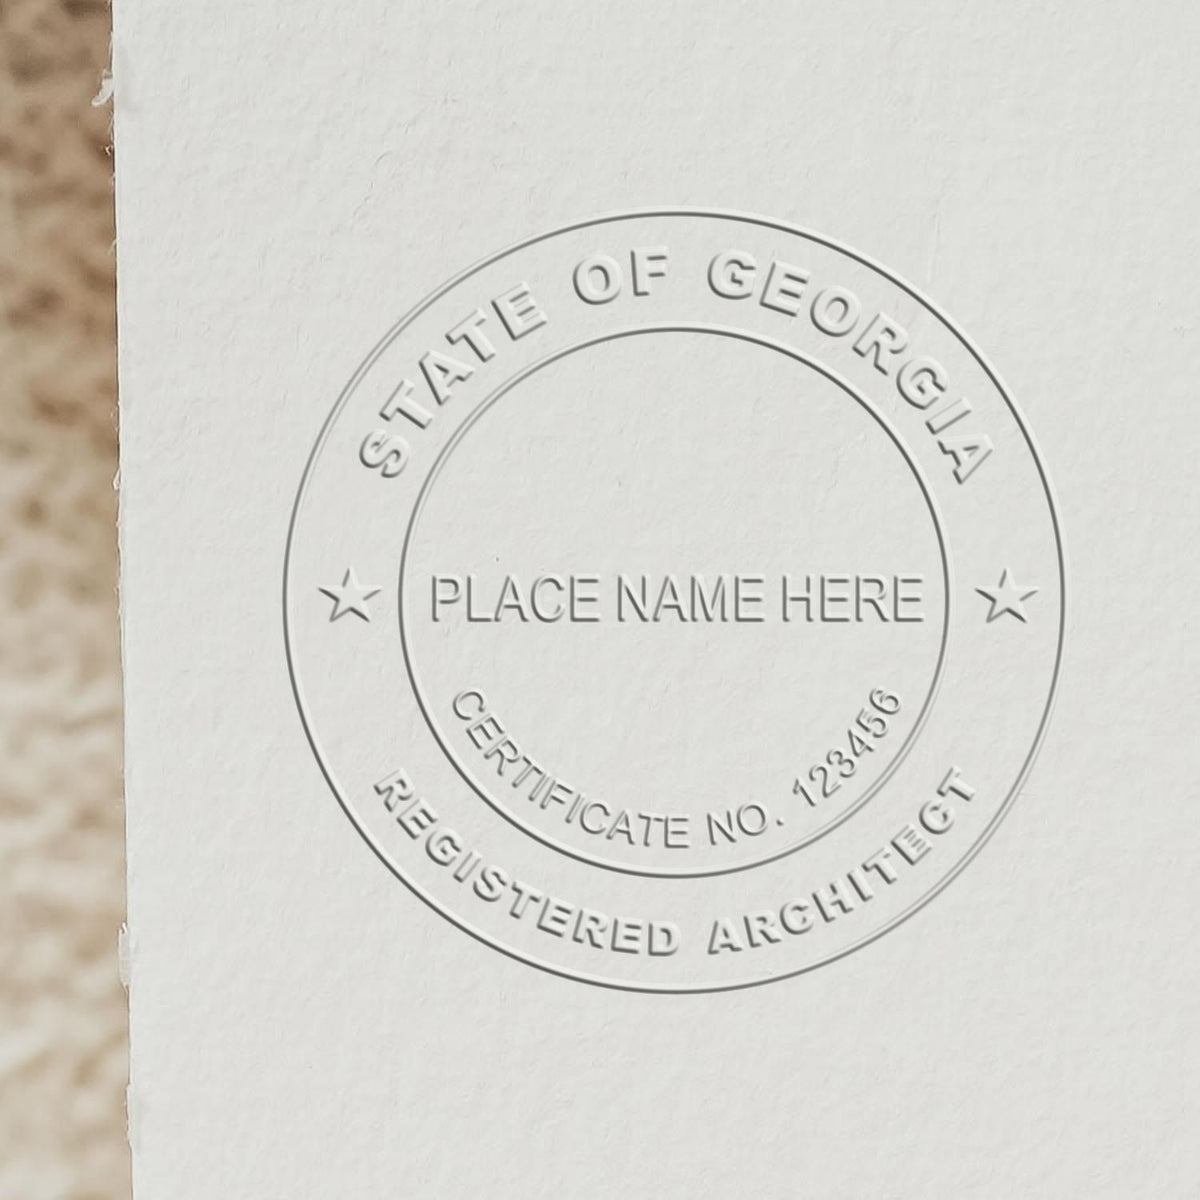 An in use photo of the Hybrid Georgia Architect Seal showing a sample imprint on a cardstock